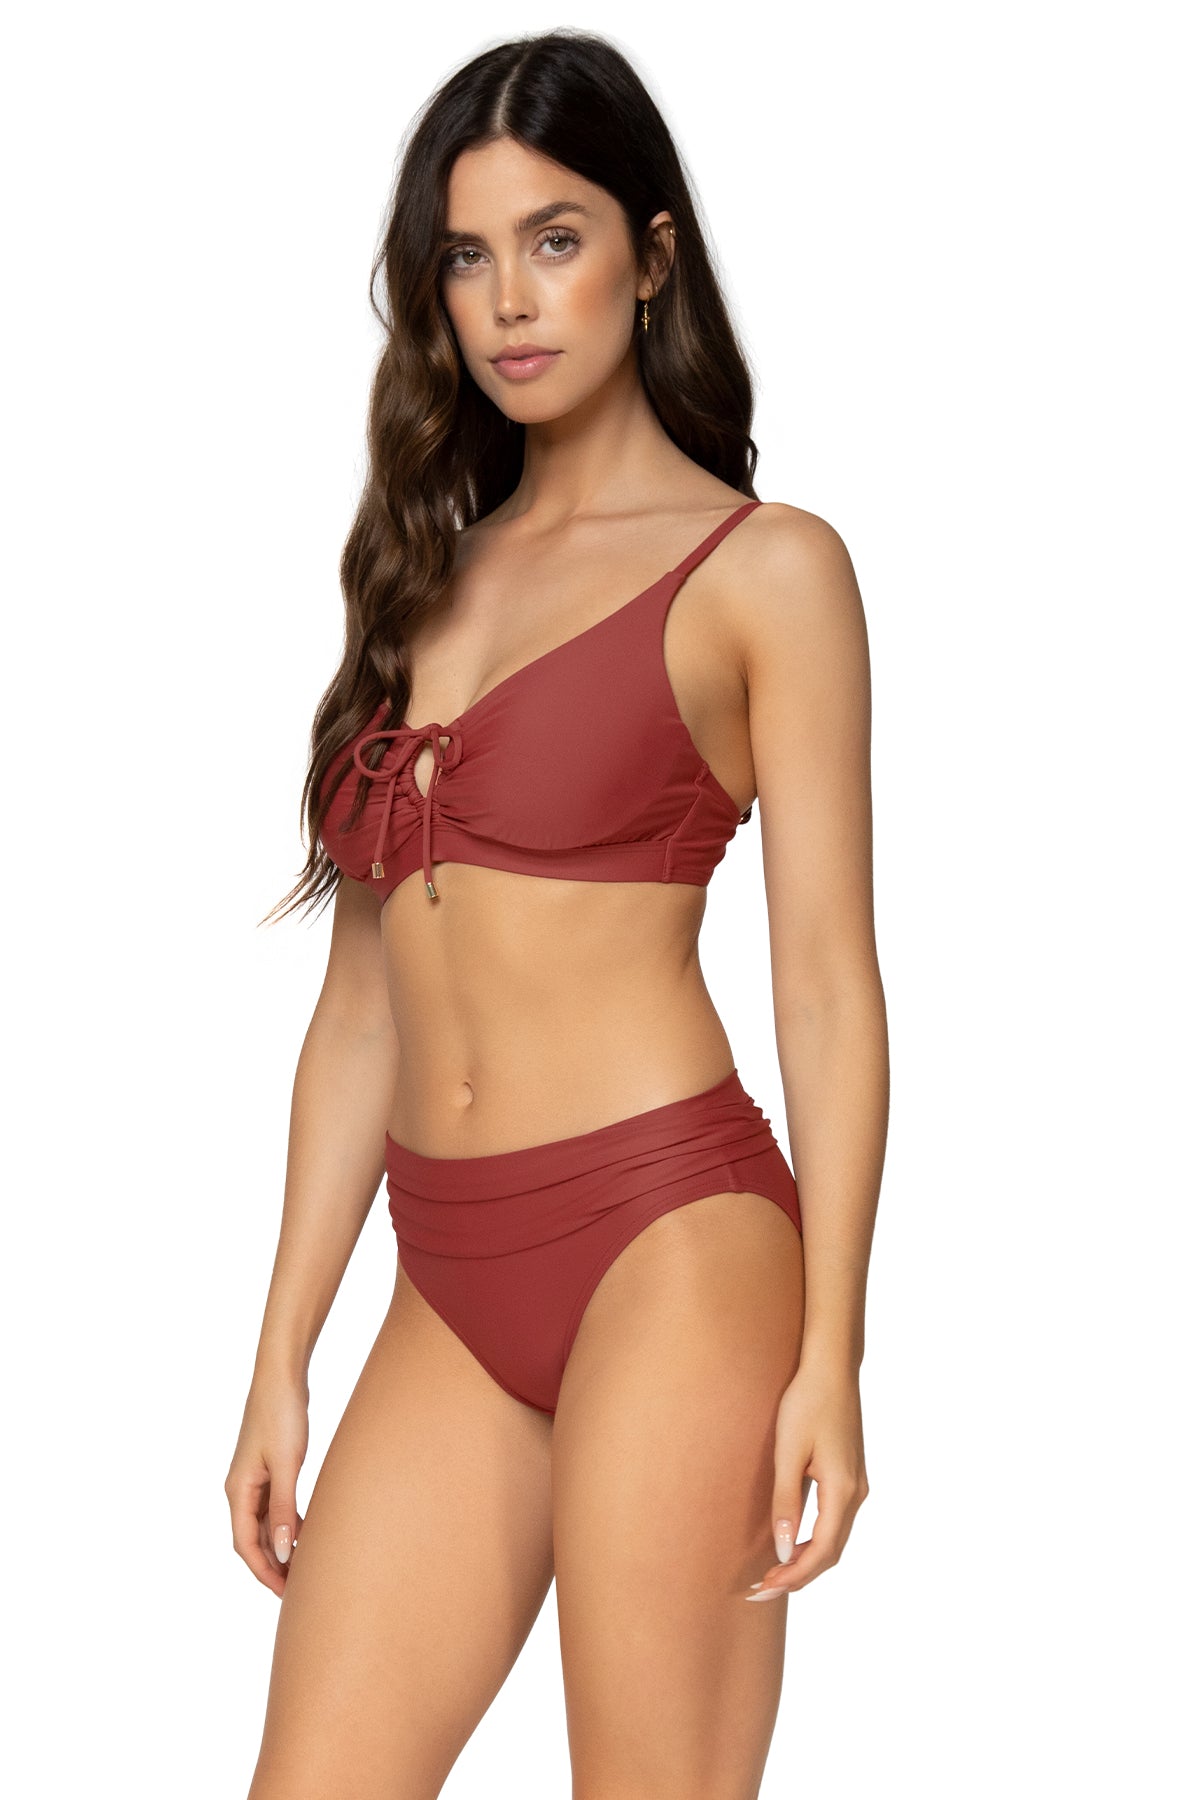 Side view of Sunsets Tuscan Red Kauai Keyhole Top with matching Unforgettable Bottom bikini